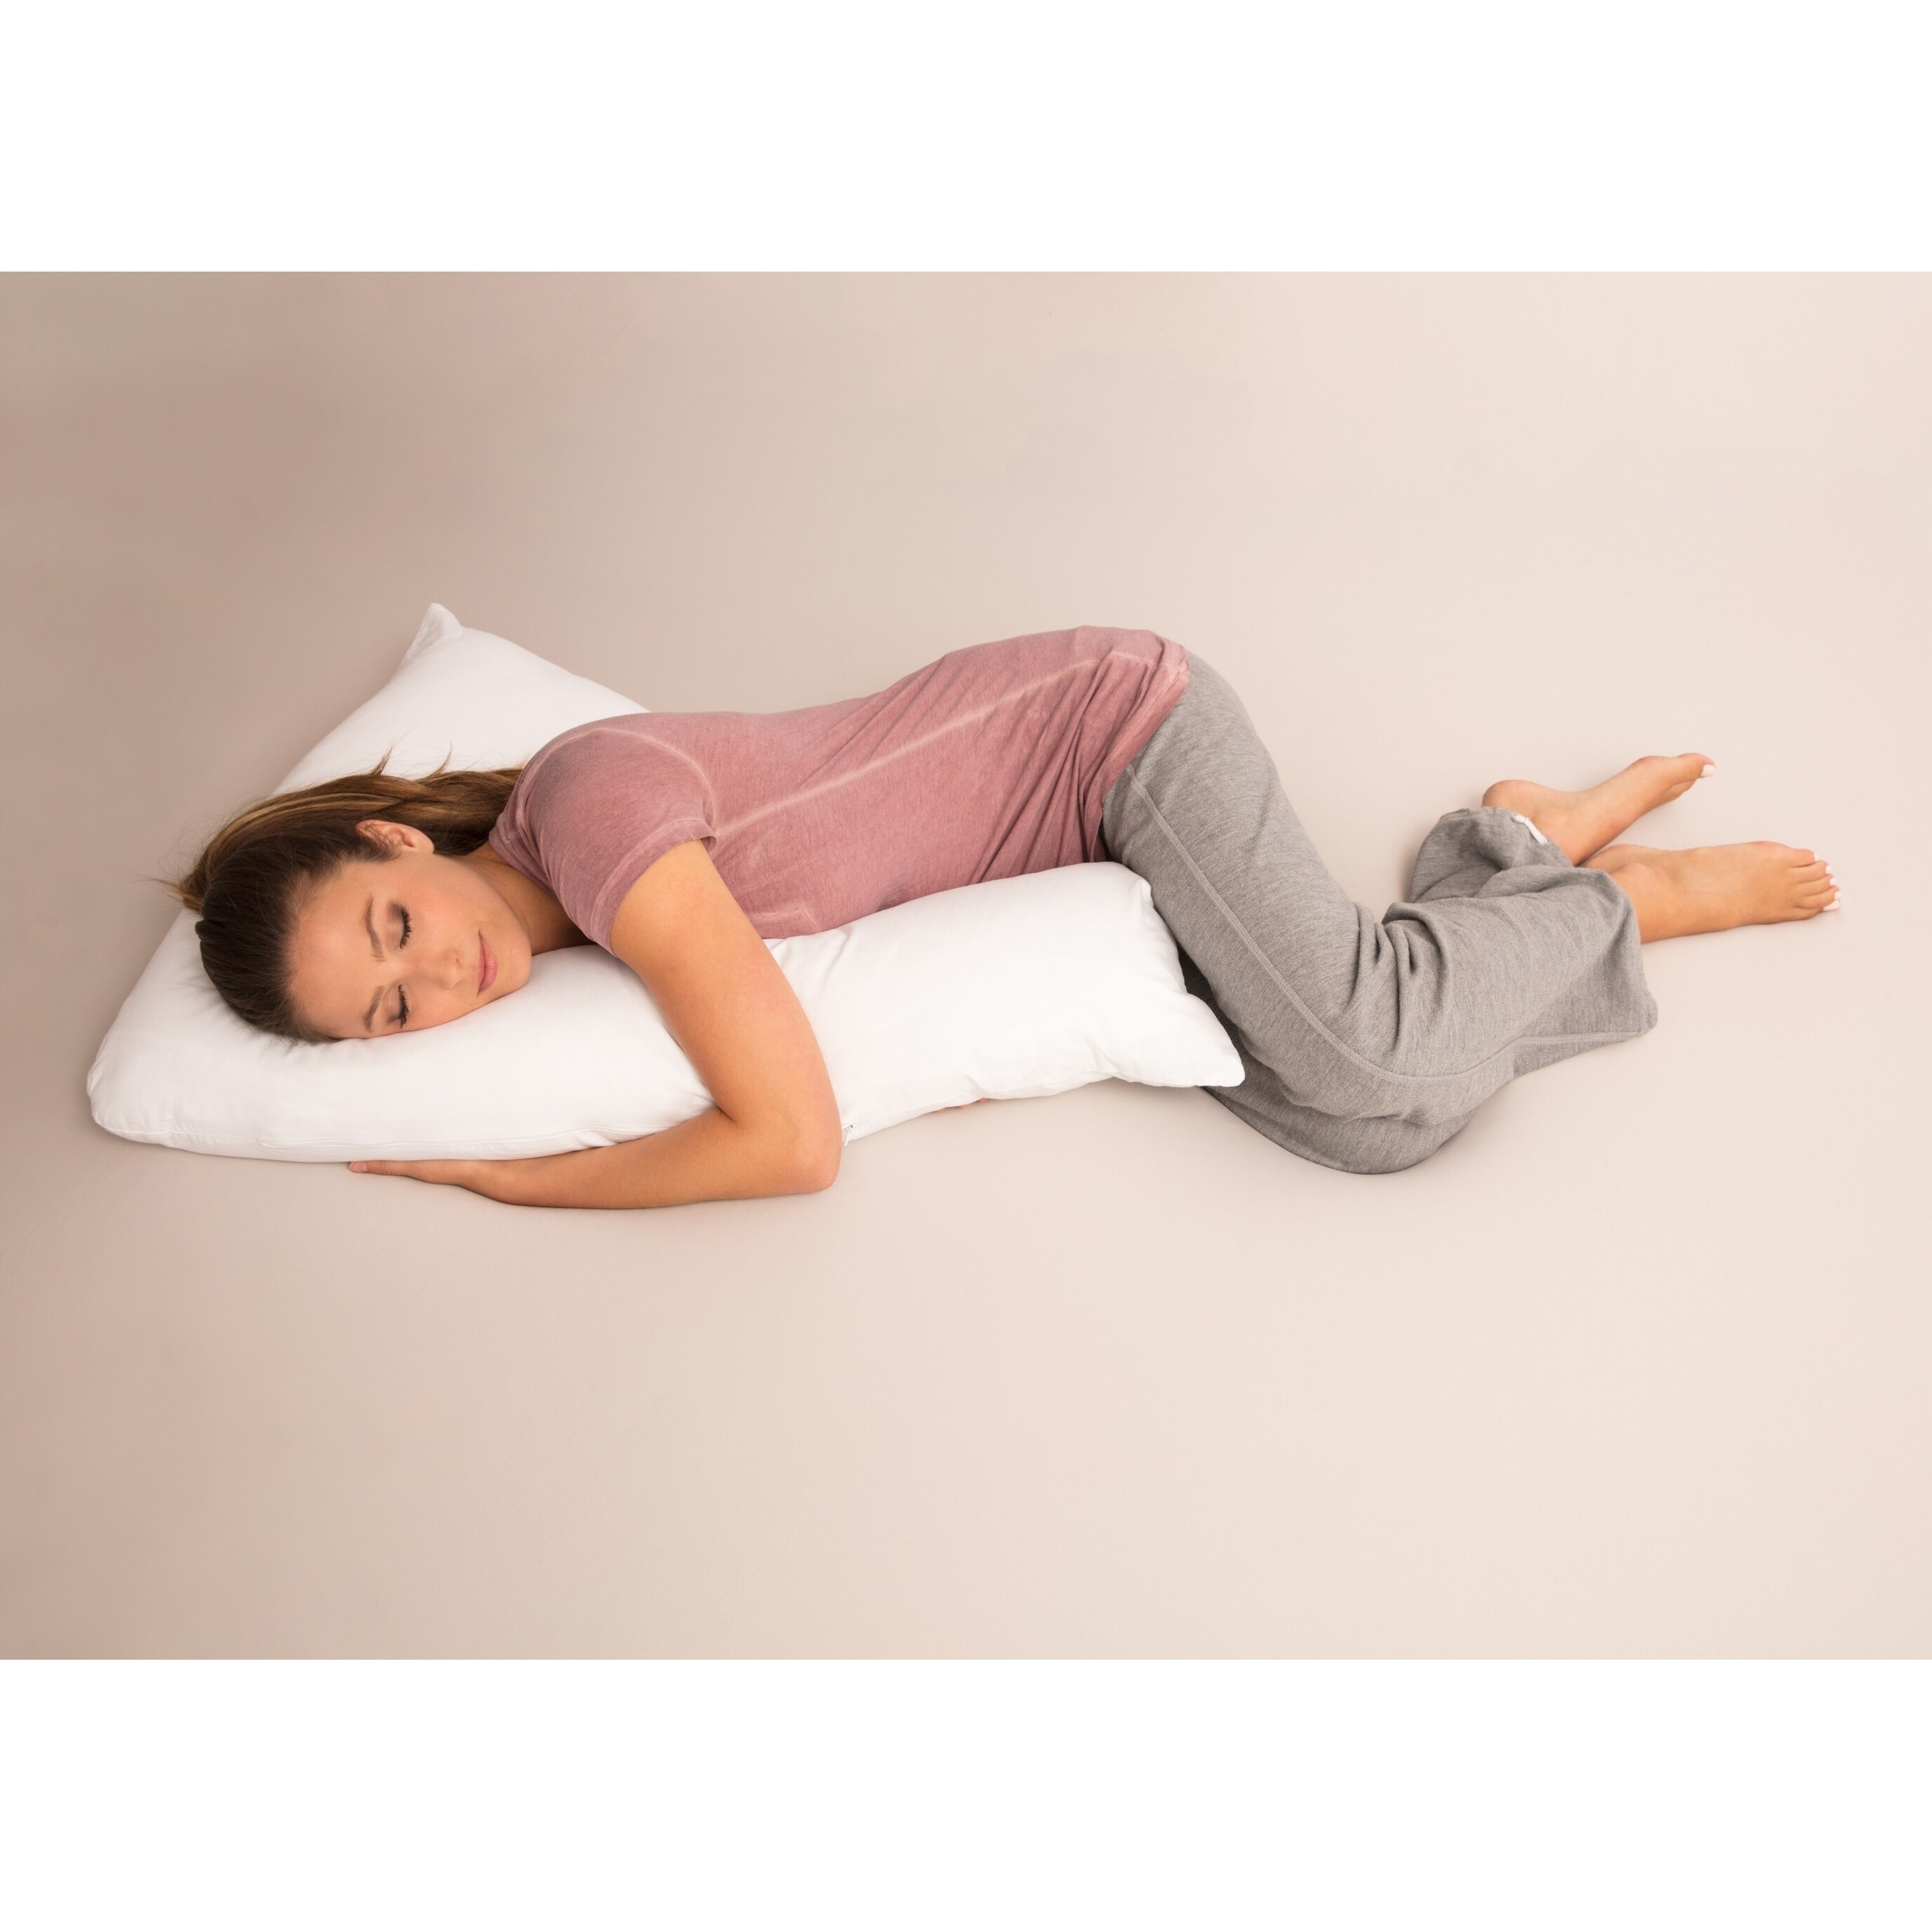 https://ak1.ostkcdn.com/images/products/10812283/L-Shaped-Long-Body-Pregnancy-Pillow-with-Neck-Support-for-Side-Sleeping-2df581d8-db03-4cb0-ba32-450d2d25c87c.jpg